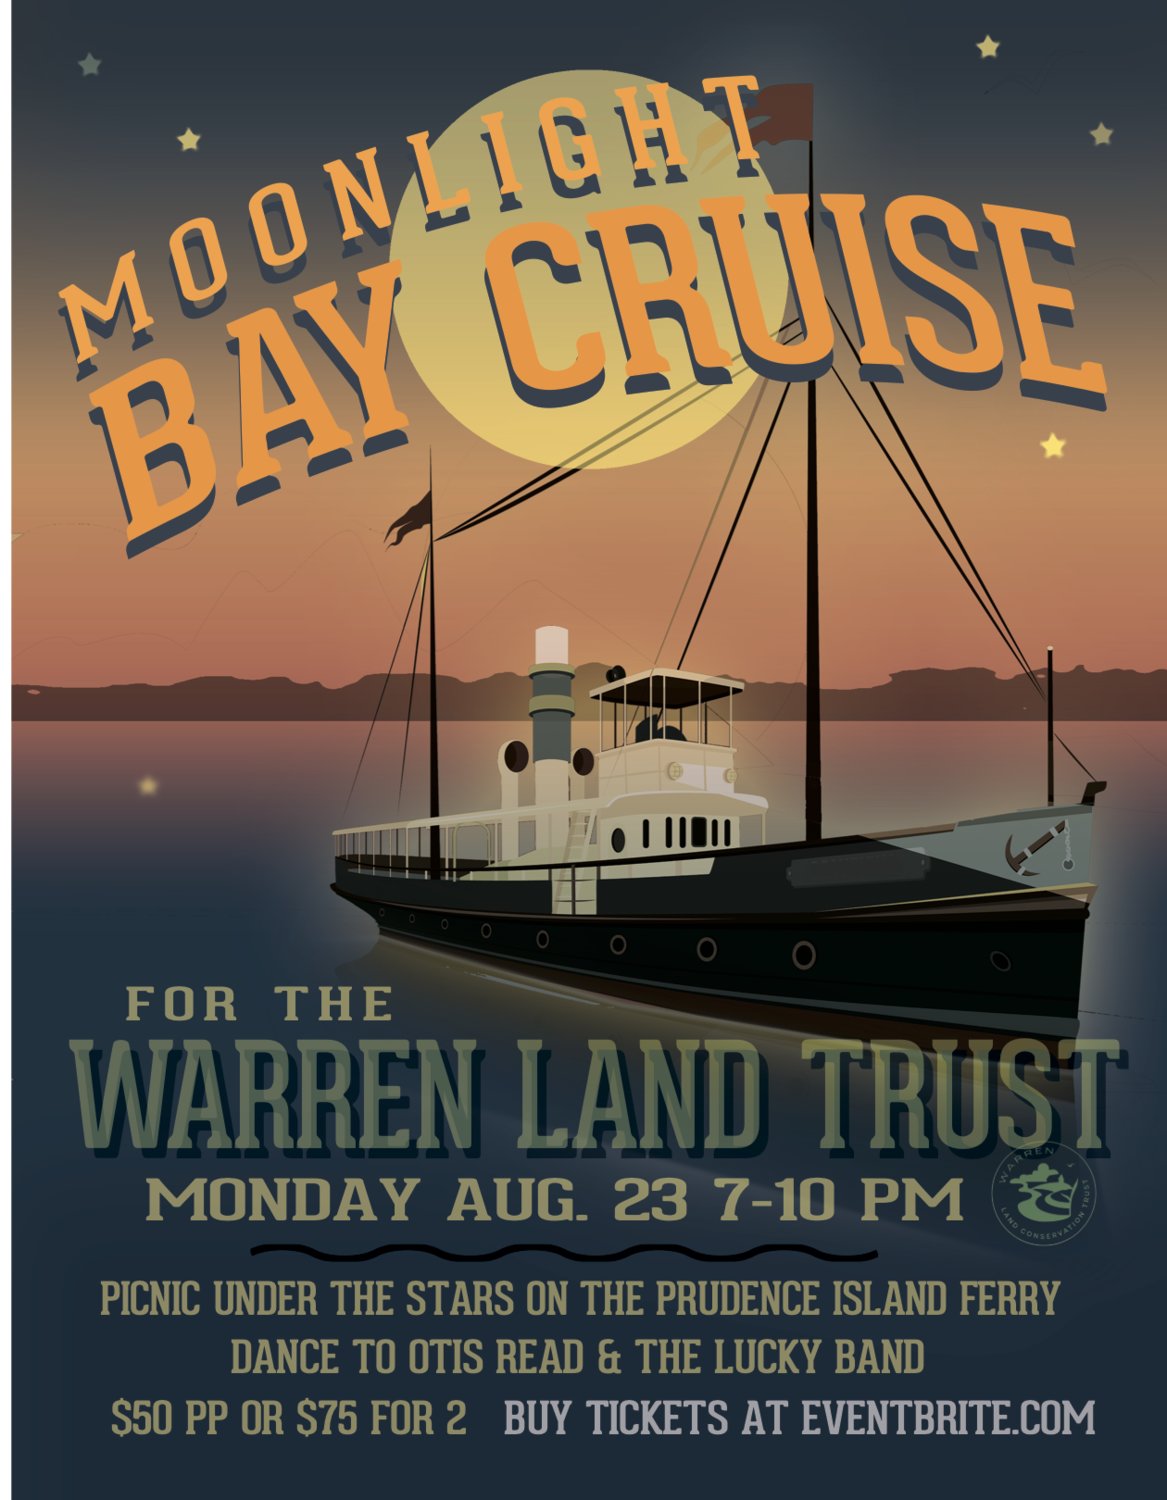 The Warren Land Conservation Trust is throwing their first-ever Cruise Night to raise money to benefit their open space projects throughout Warren. Limited tickets are still available.